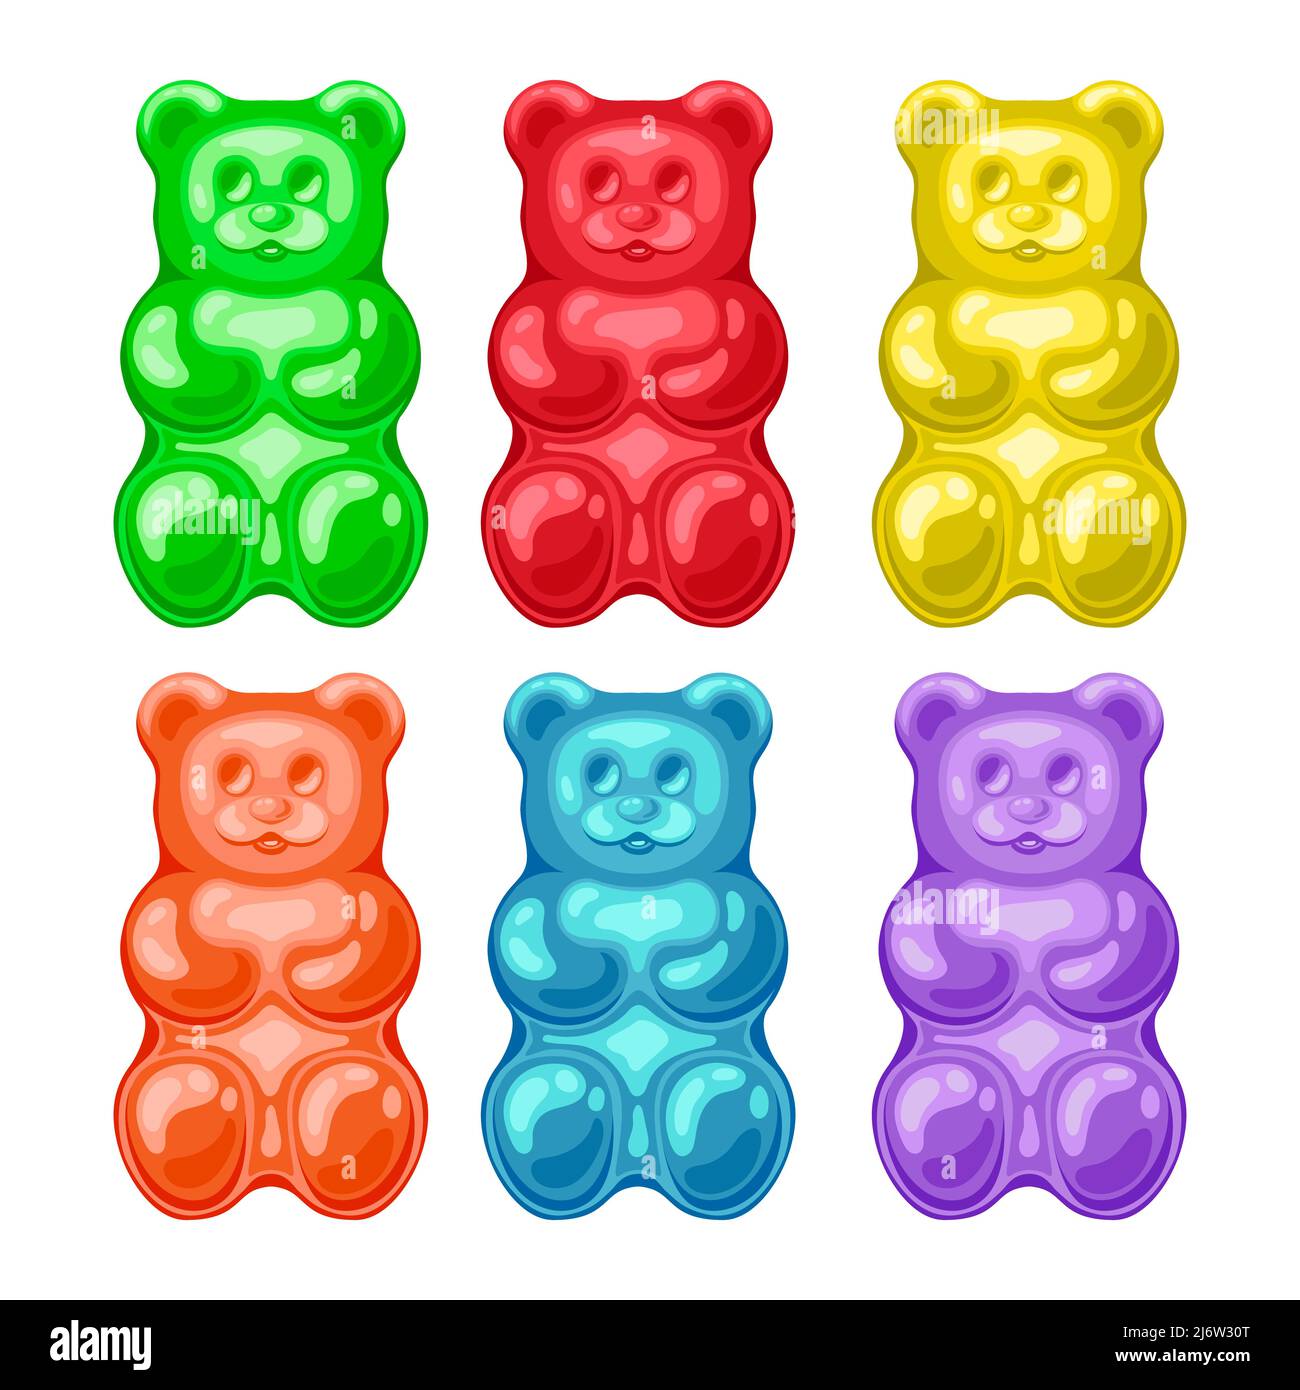 Jelly bears of different colors. Sweet, unhealthy, bad for the teeth food. Dessert, appetizer, children's food. Illustration in cartoon flat style. Is Stock Vector